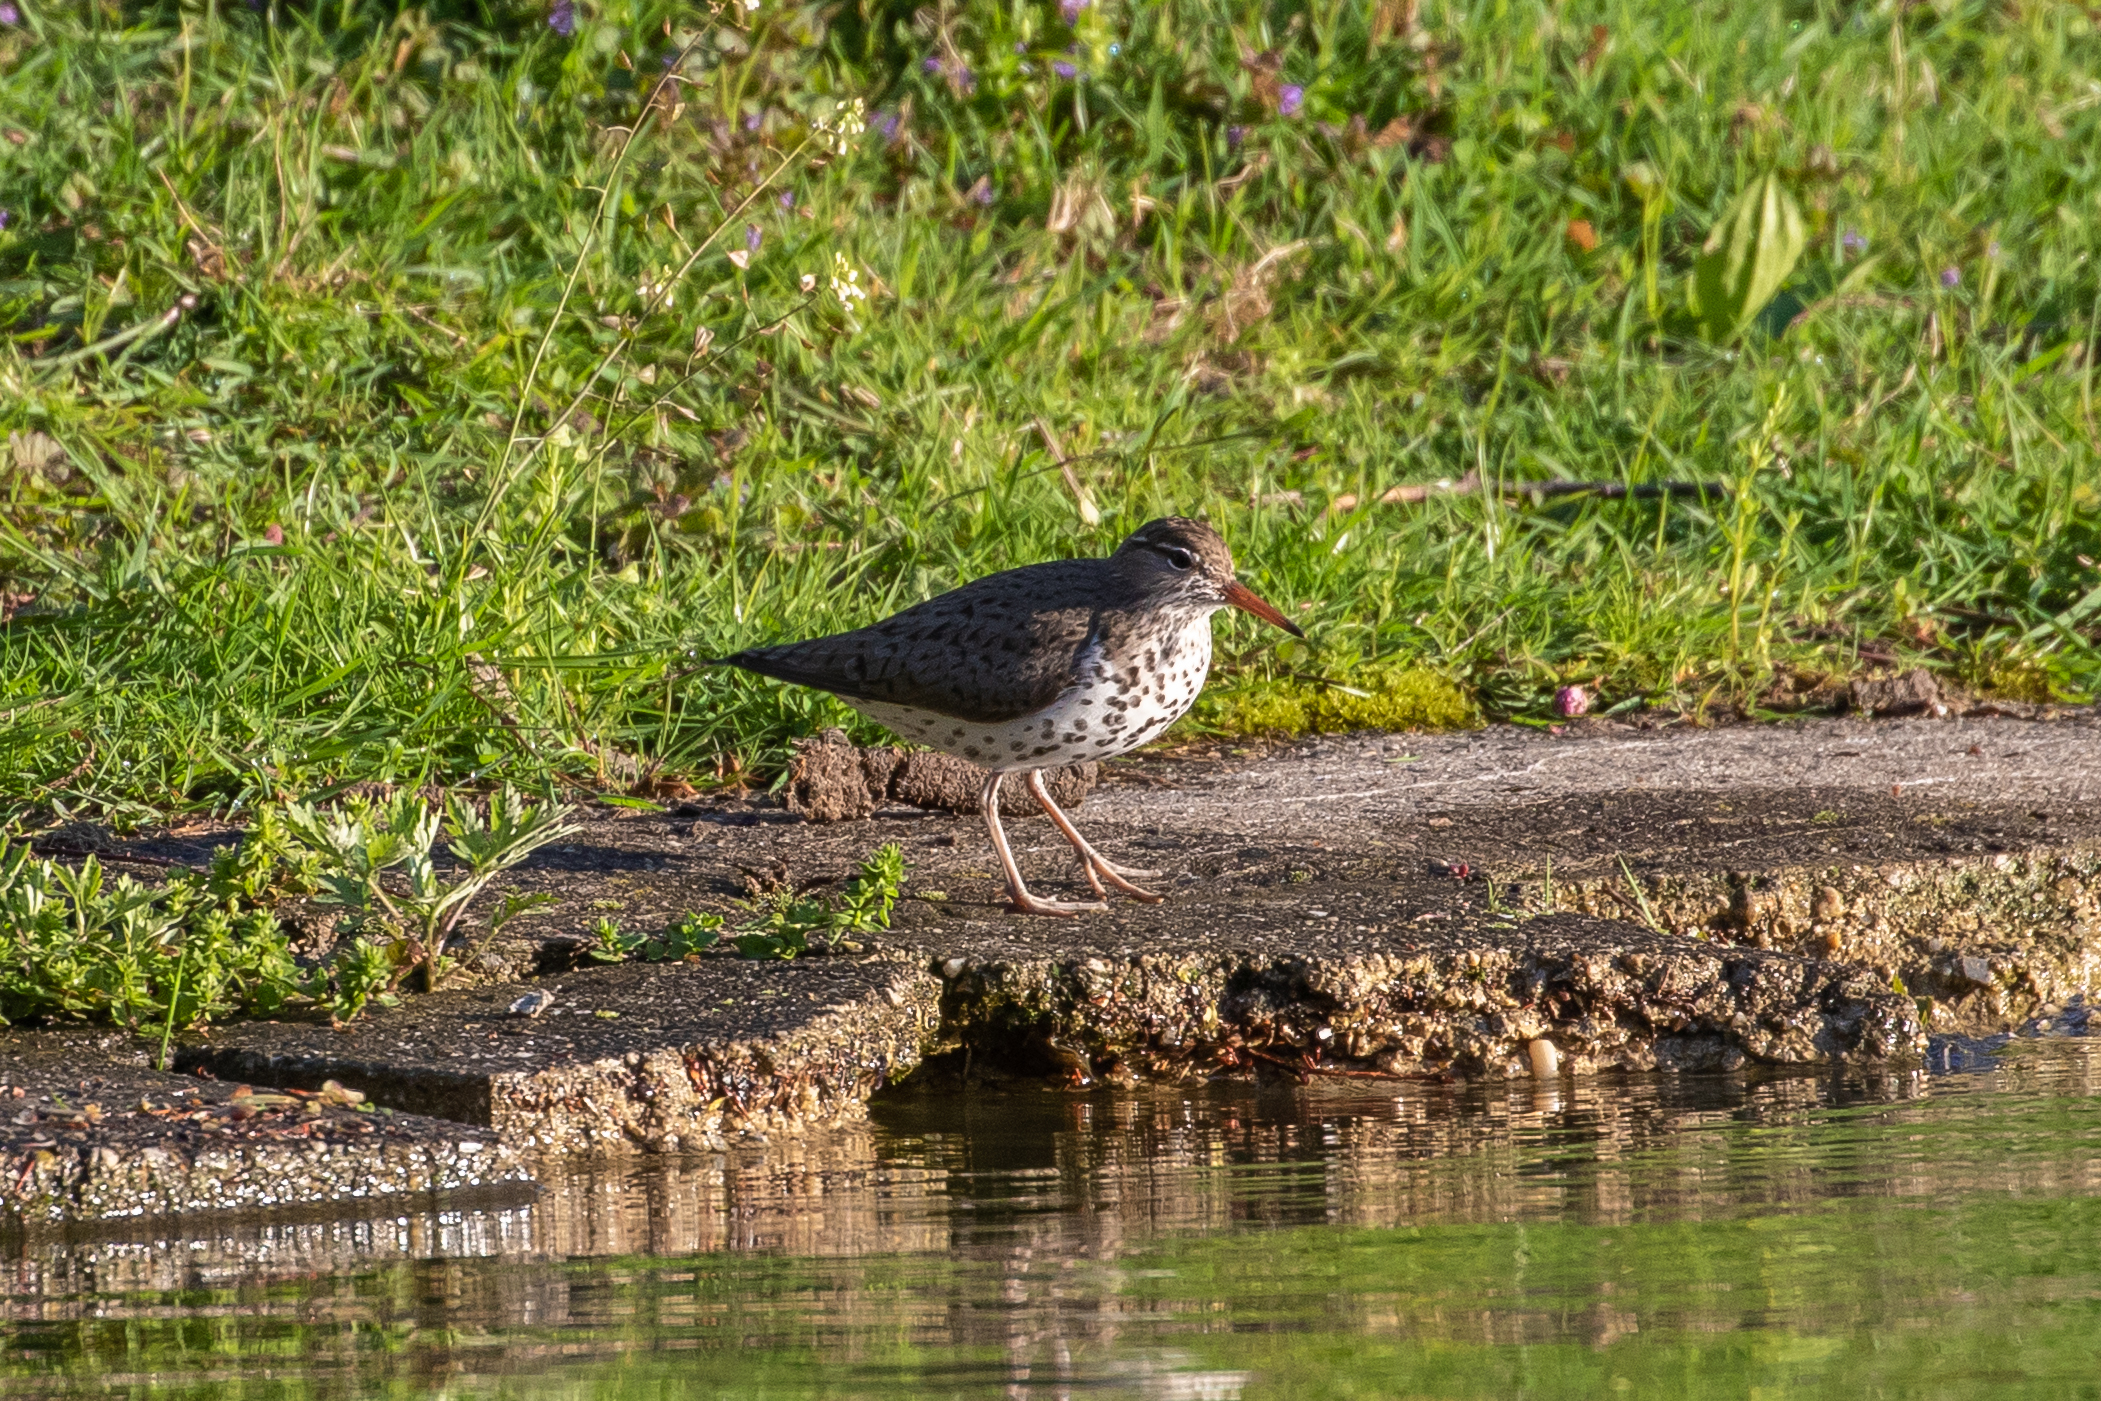  Fresh water-loving sandpipers like this Spotted Sandpiper are frequently seen in Green-Wood Cemetery during migration. Photo: Ryan F. Mandelbaum